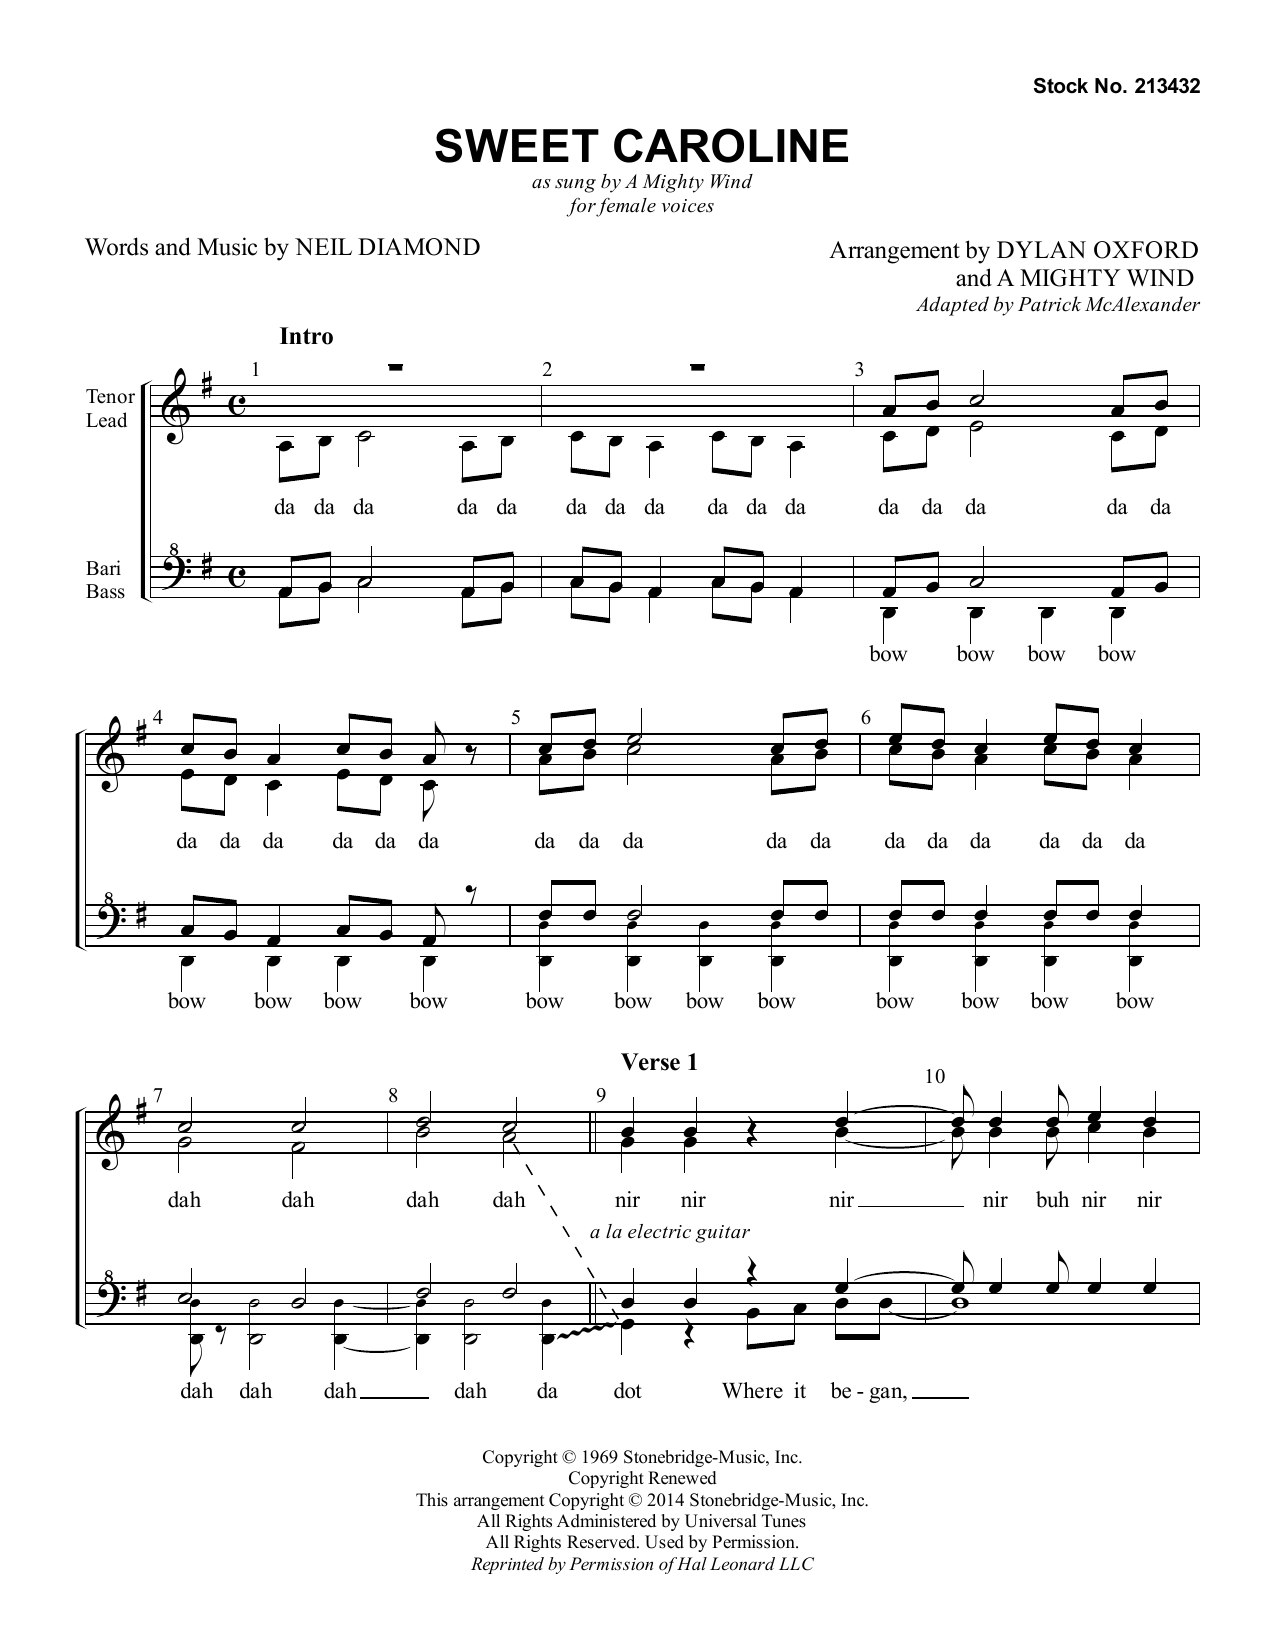 Download A Mighty Wind Sweet Caroline (arr. Dylan Oxford & A M Sheet Music